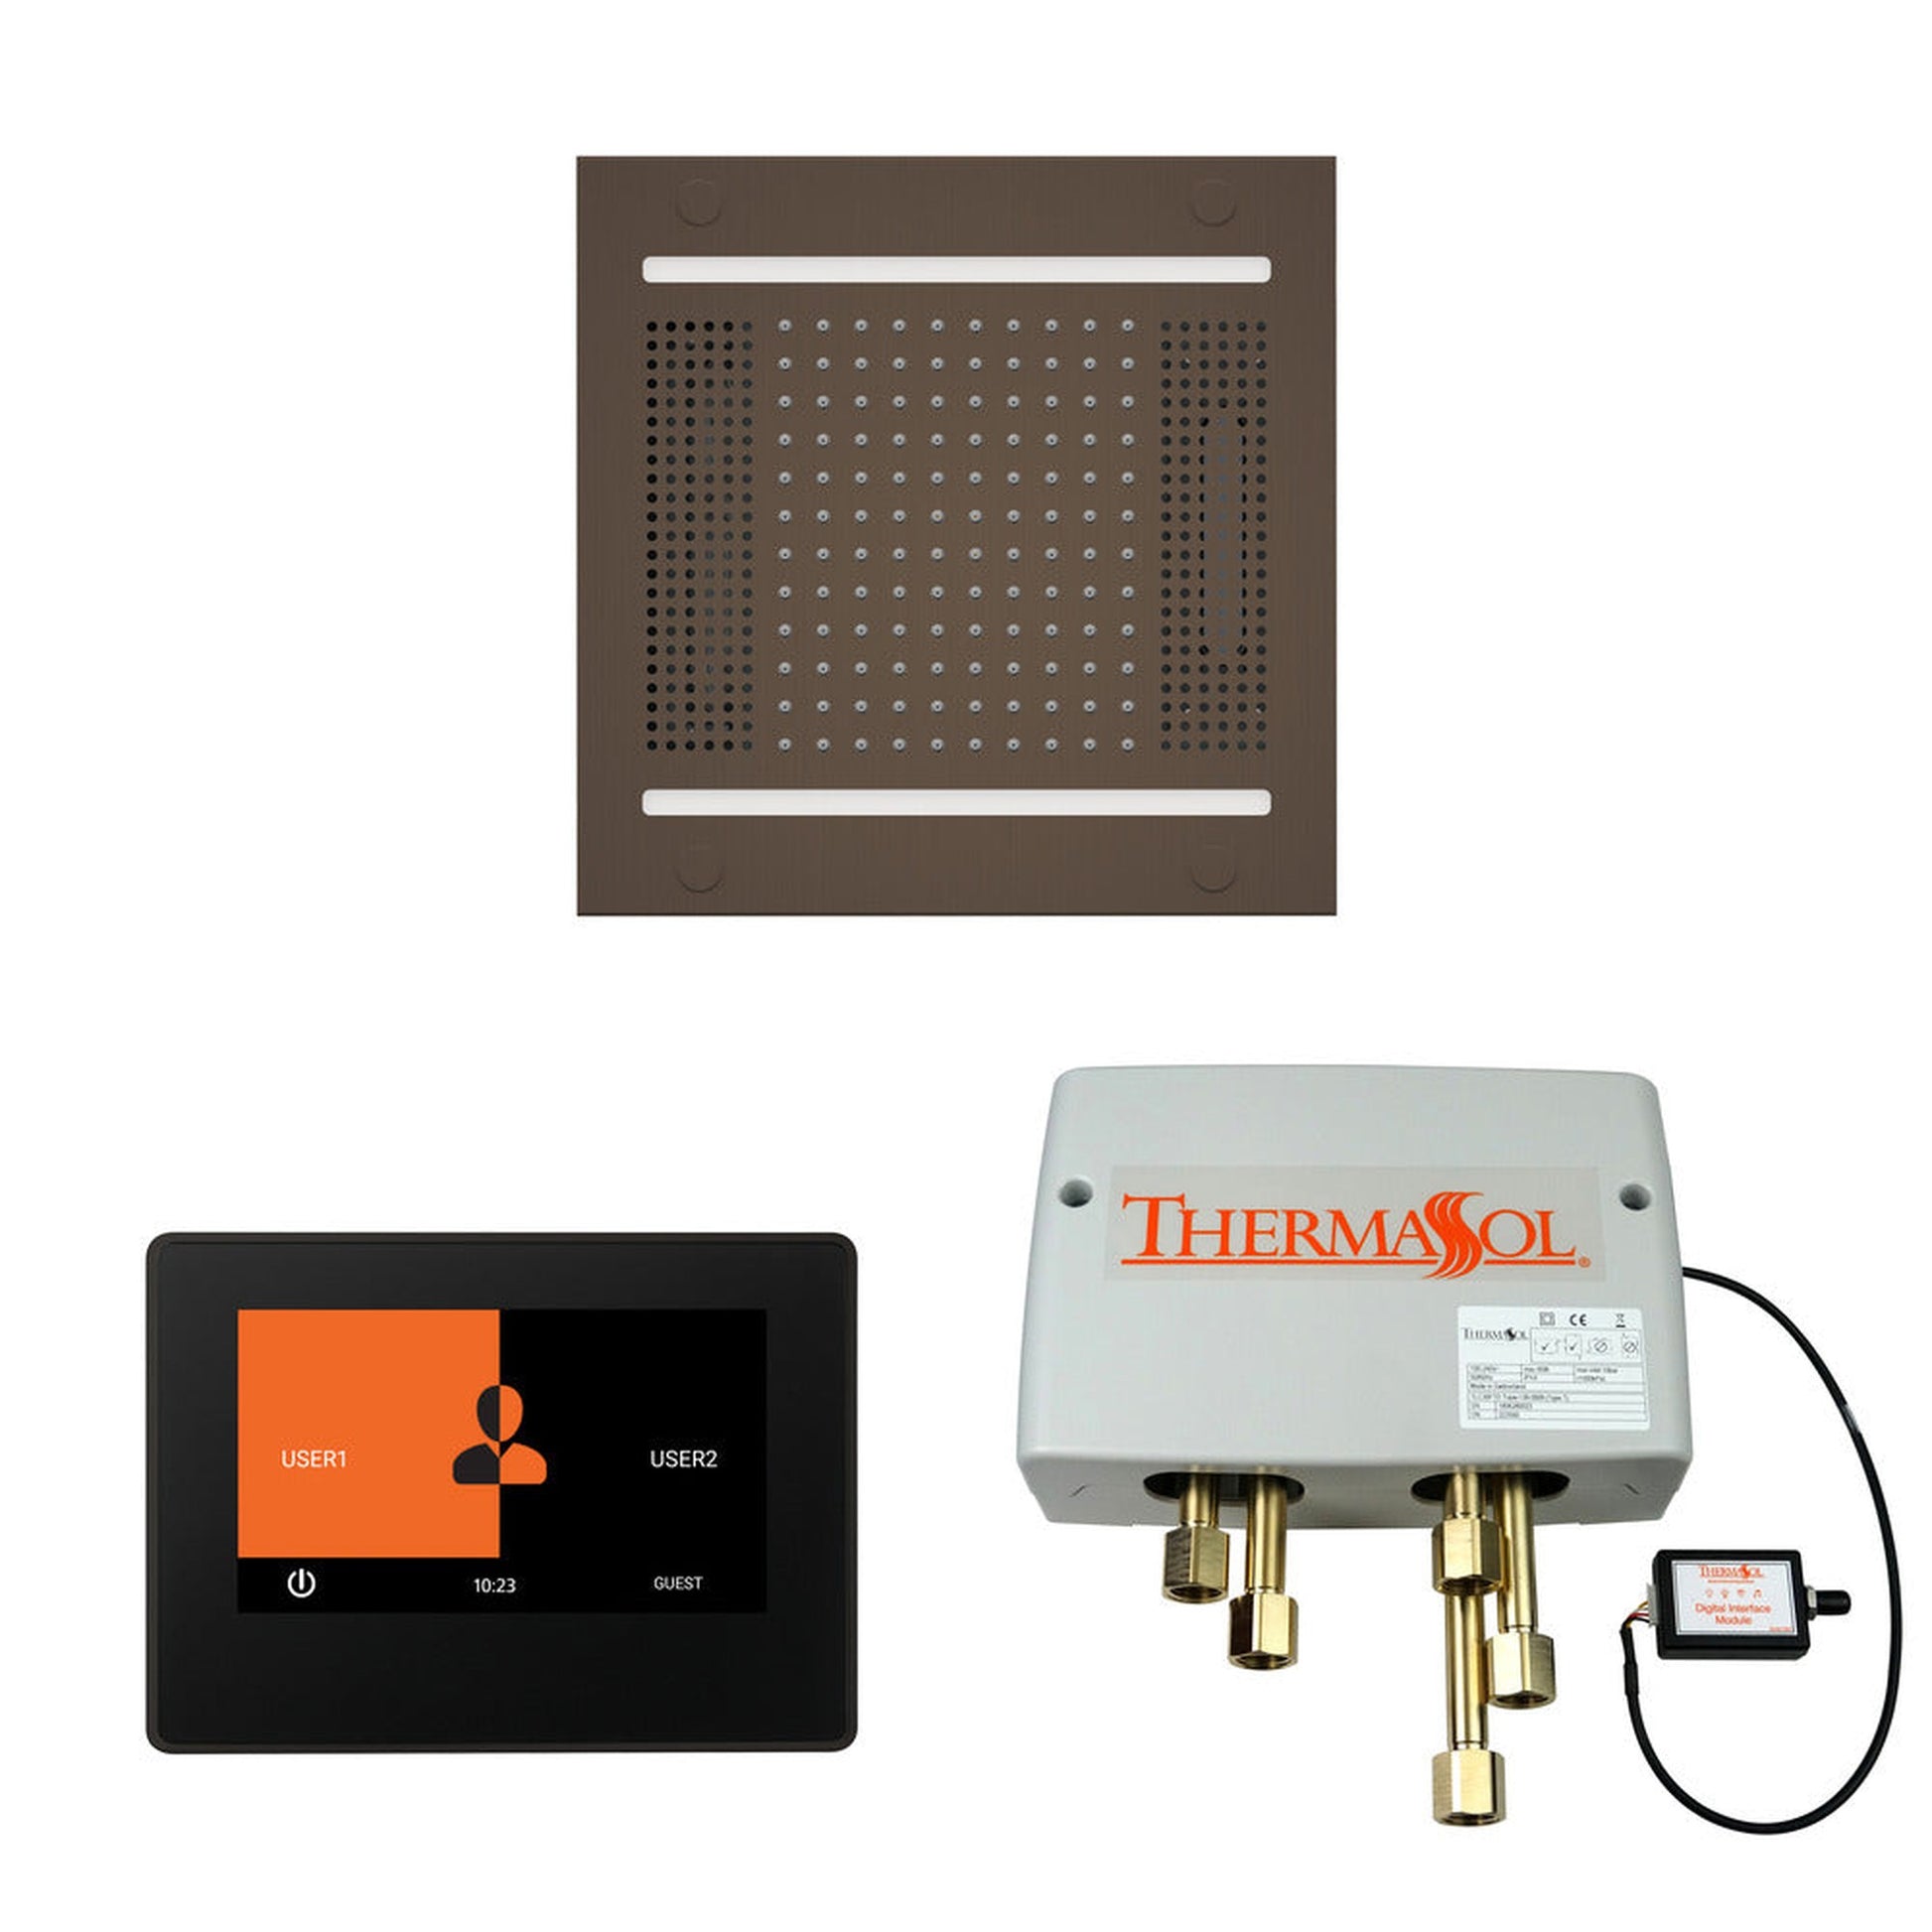 ThermaSol The Wellness Oil Rubbed Bronze Finish Hydrovive14 Shower Square Package with 7" ThermaTouch